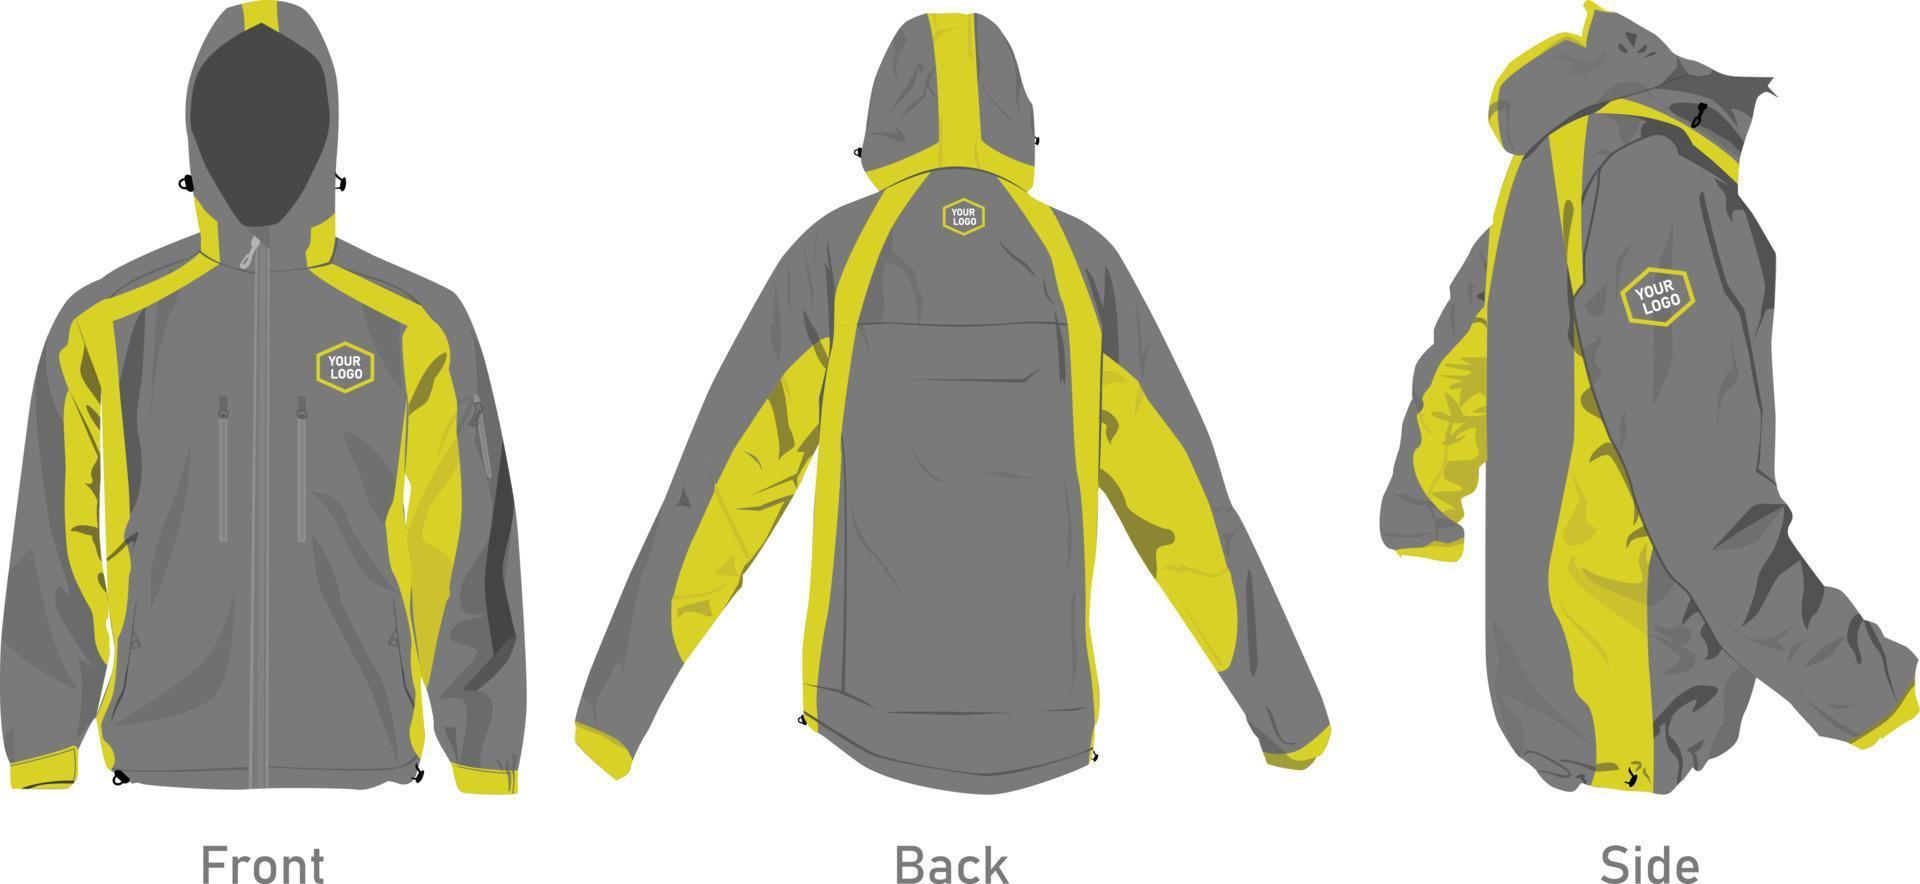 Mountain Jacket Mockup Design Vector front, side, and back view. Parachute Jacket, Polyester. Custom Concept. Isolated white background.